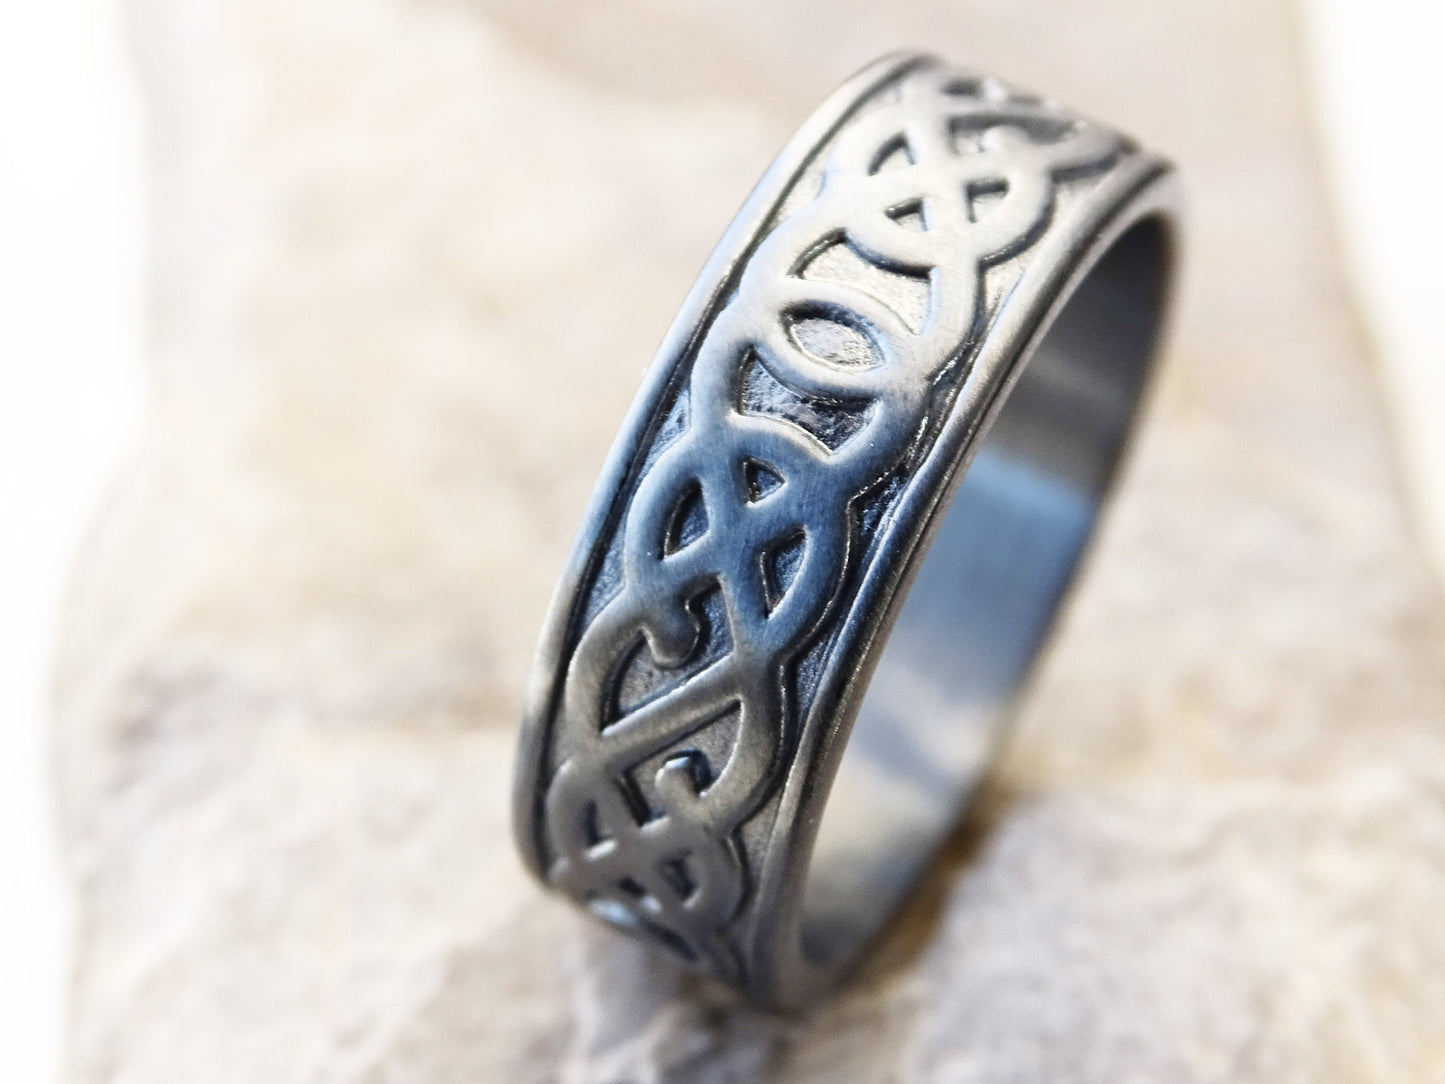 black viking silver ring, celtic knot ring black silver, knot ring celtic eternity ring silver, viking mens ring, viking wedding band silver - CrazyAss Jewelry Designs